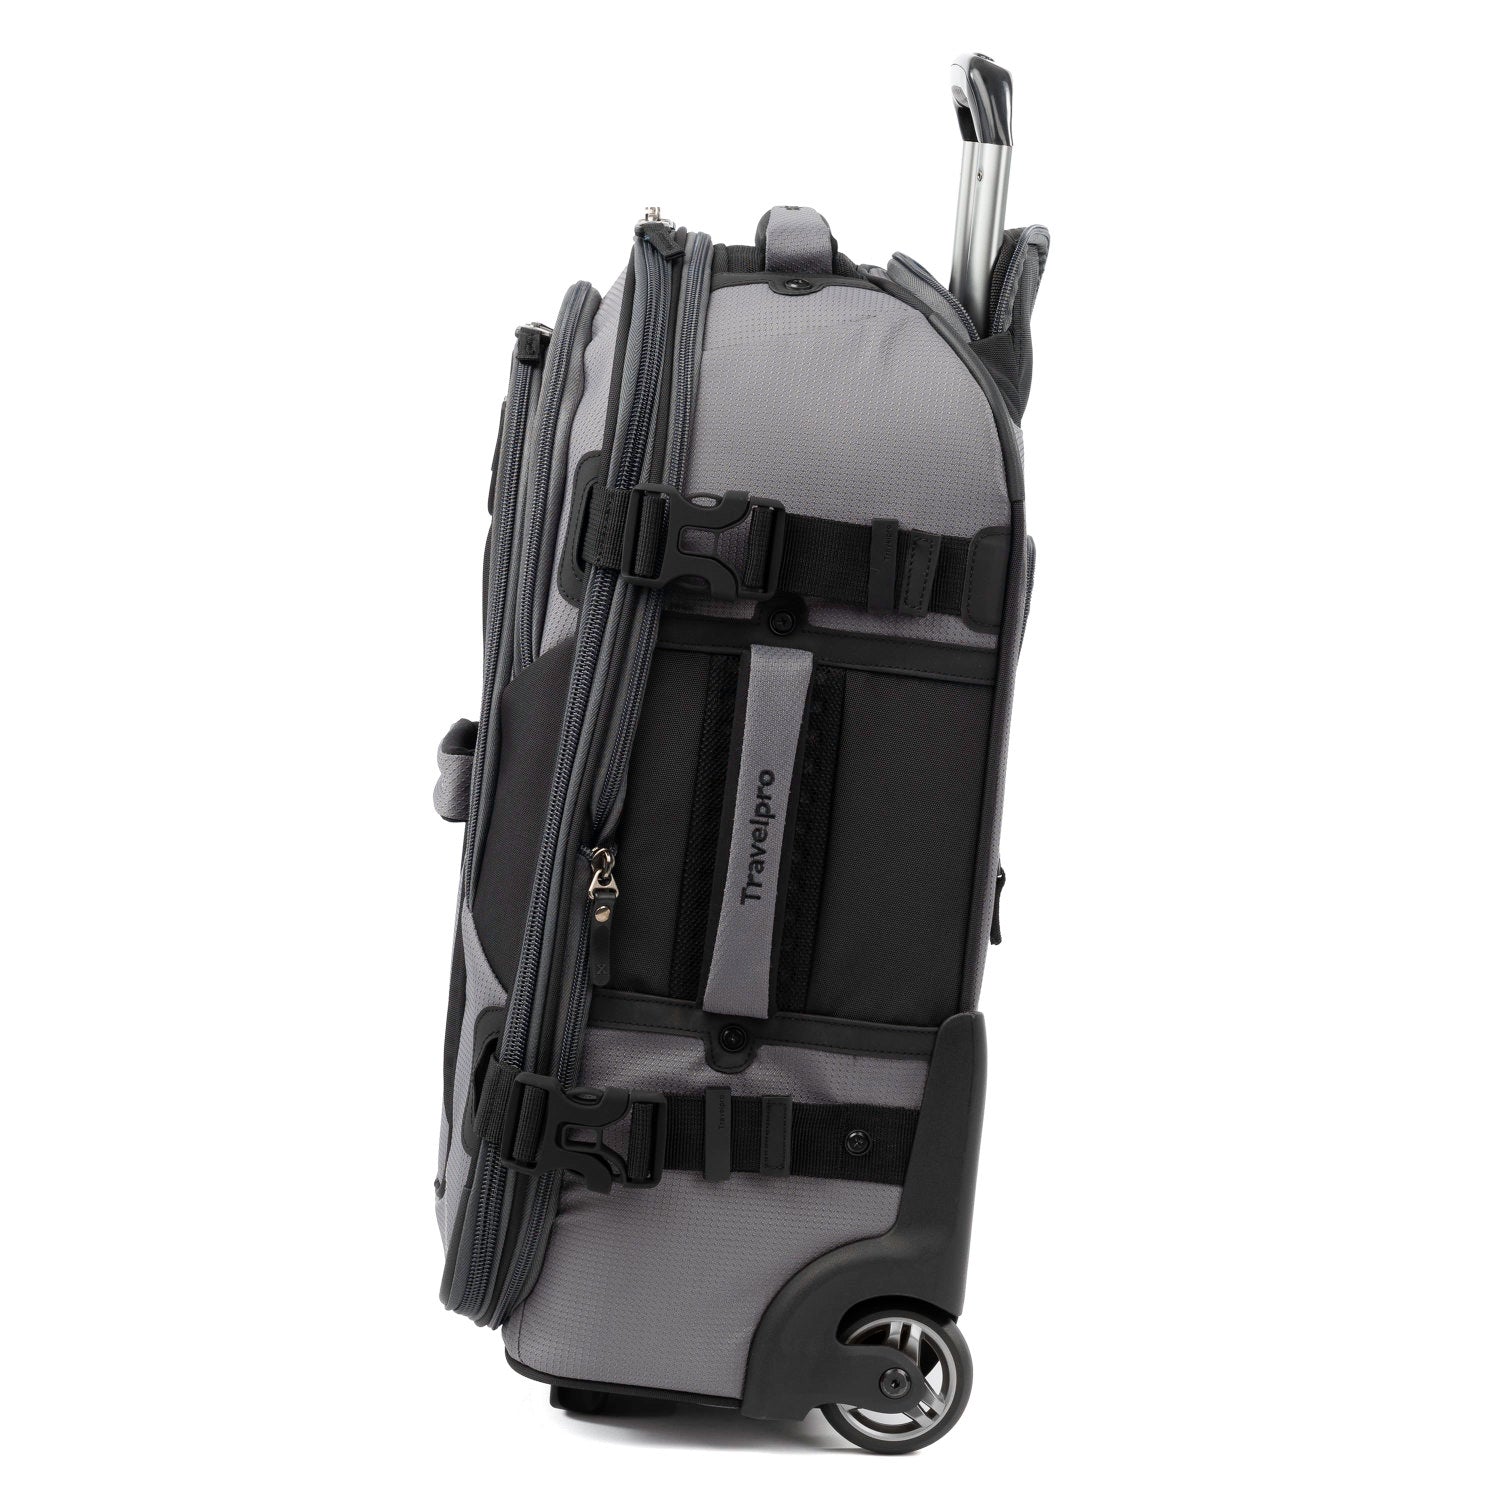 Travelpro Bold 22" Expandable Rollaboard